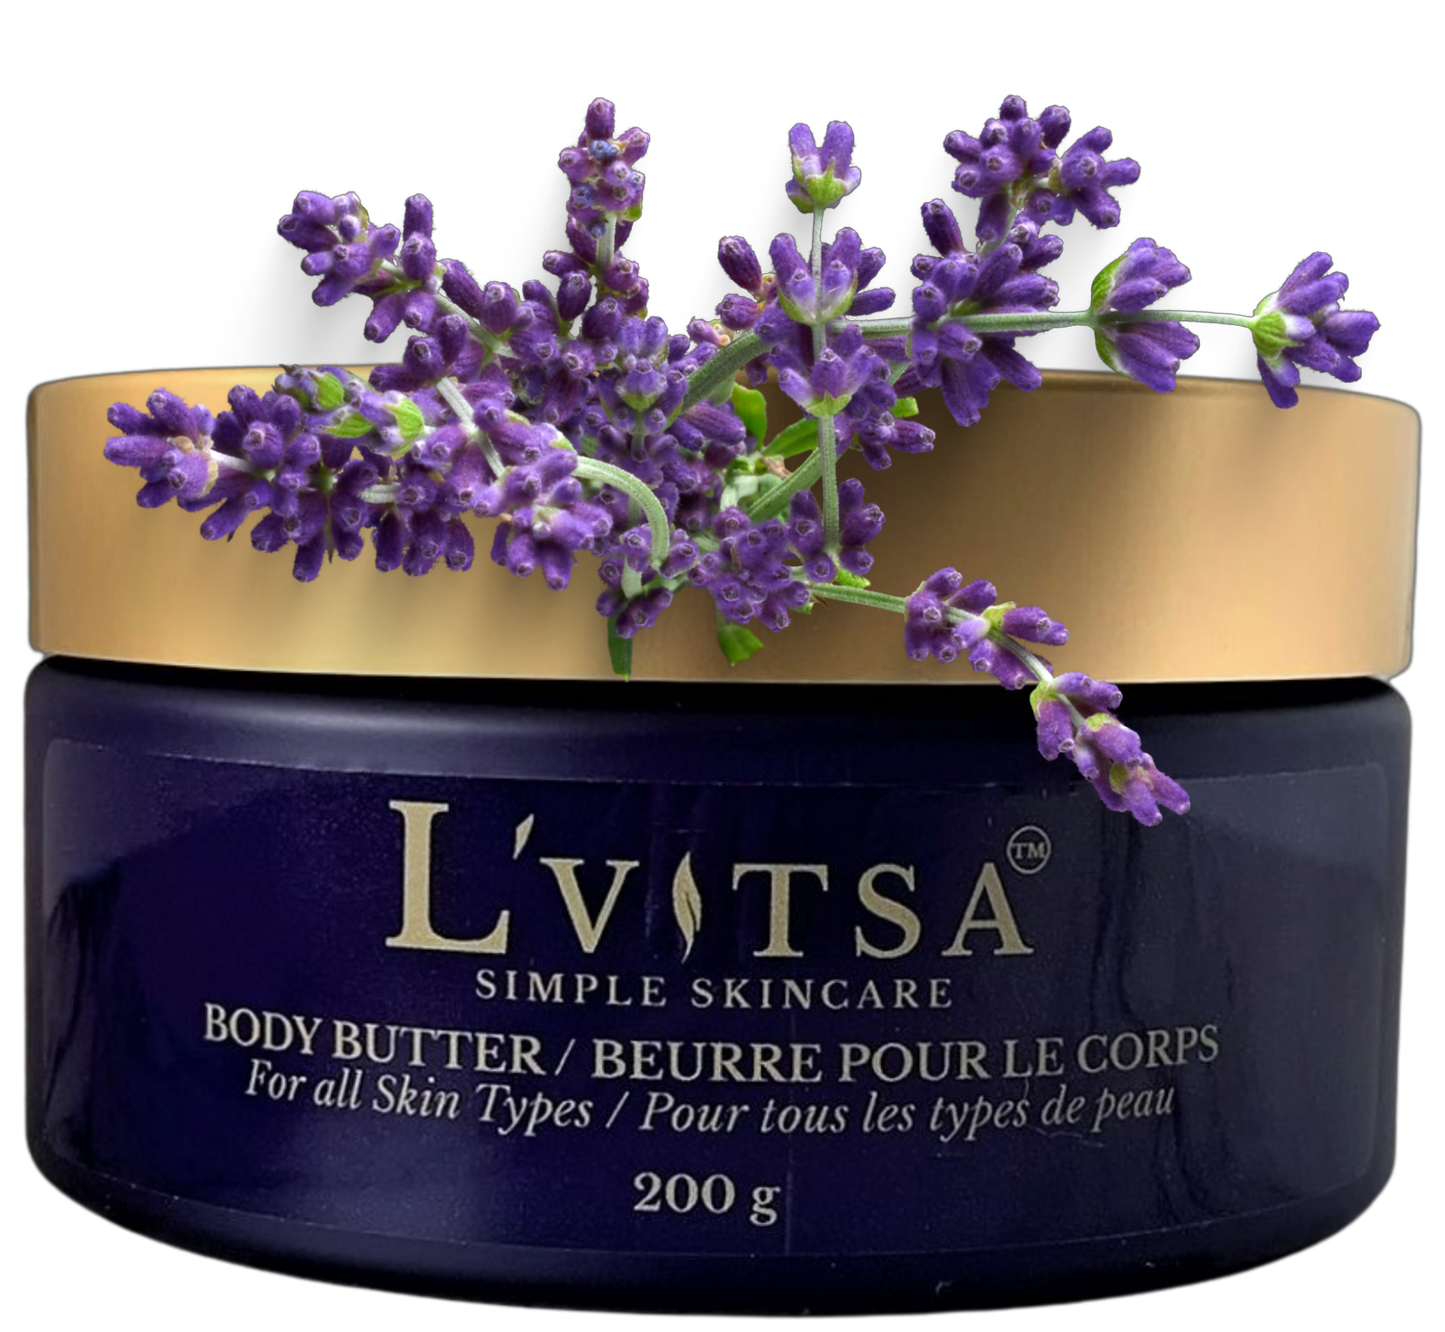 NEW Body Butter - Sweet & Floral